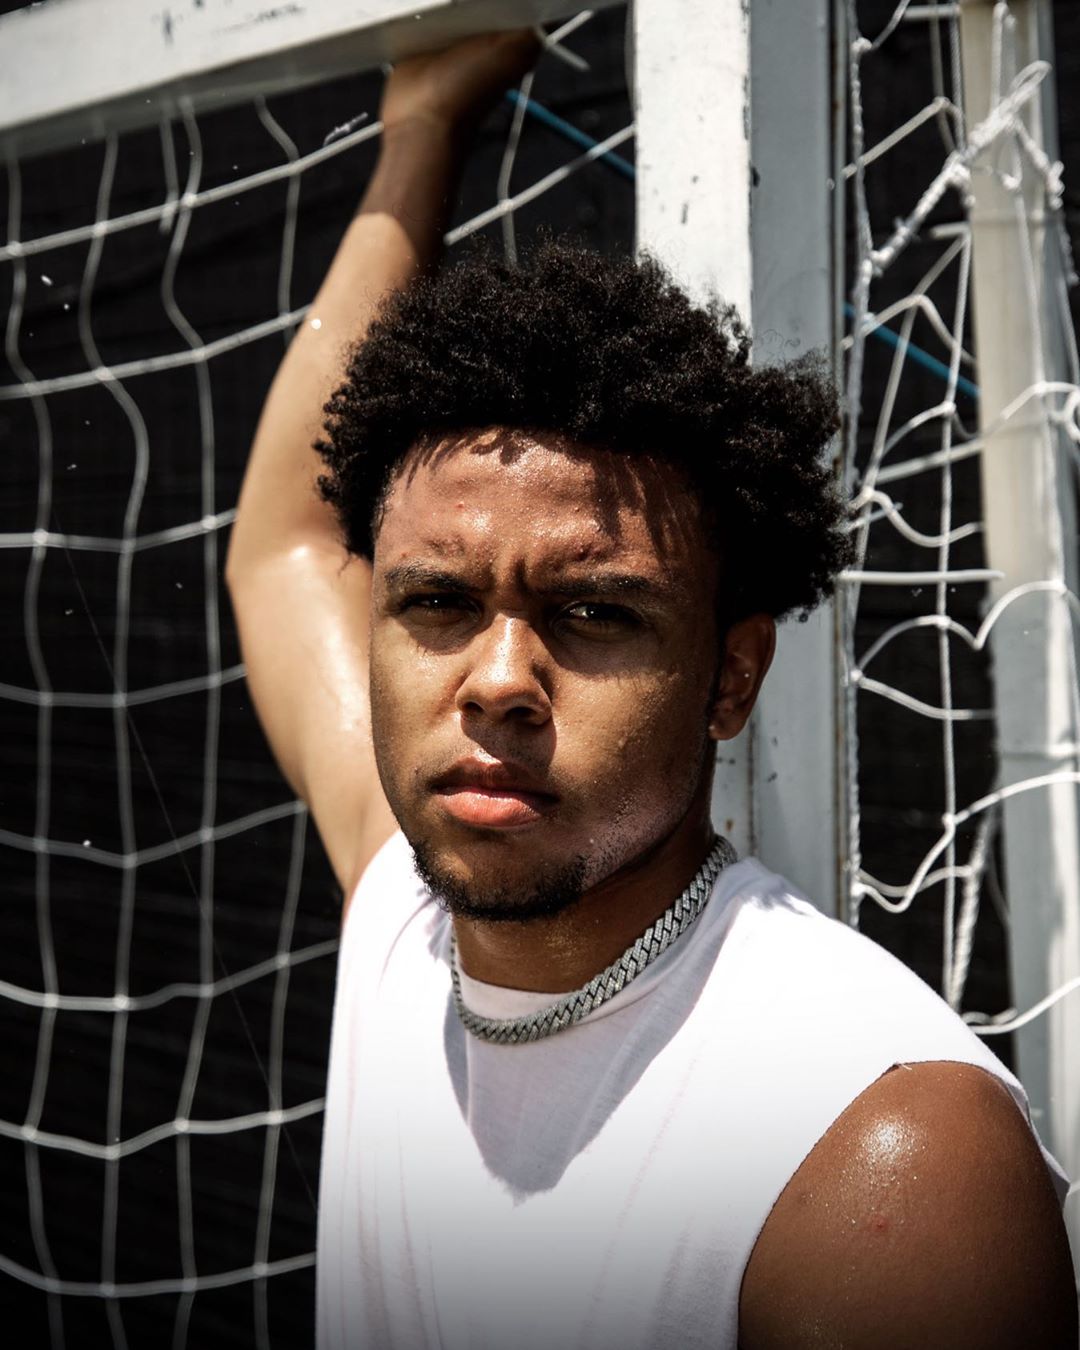 adidas - “I don’t want to be just known as a great soccer player. I want to be known as a great human being, as a great person.”⁣⁣⁣
⁣⁣⁣
@juventus midfielder Weston McKennie (@west.mckennie) shares the...